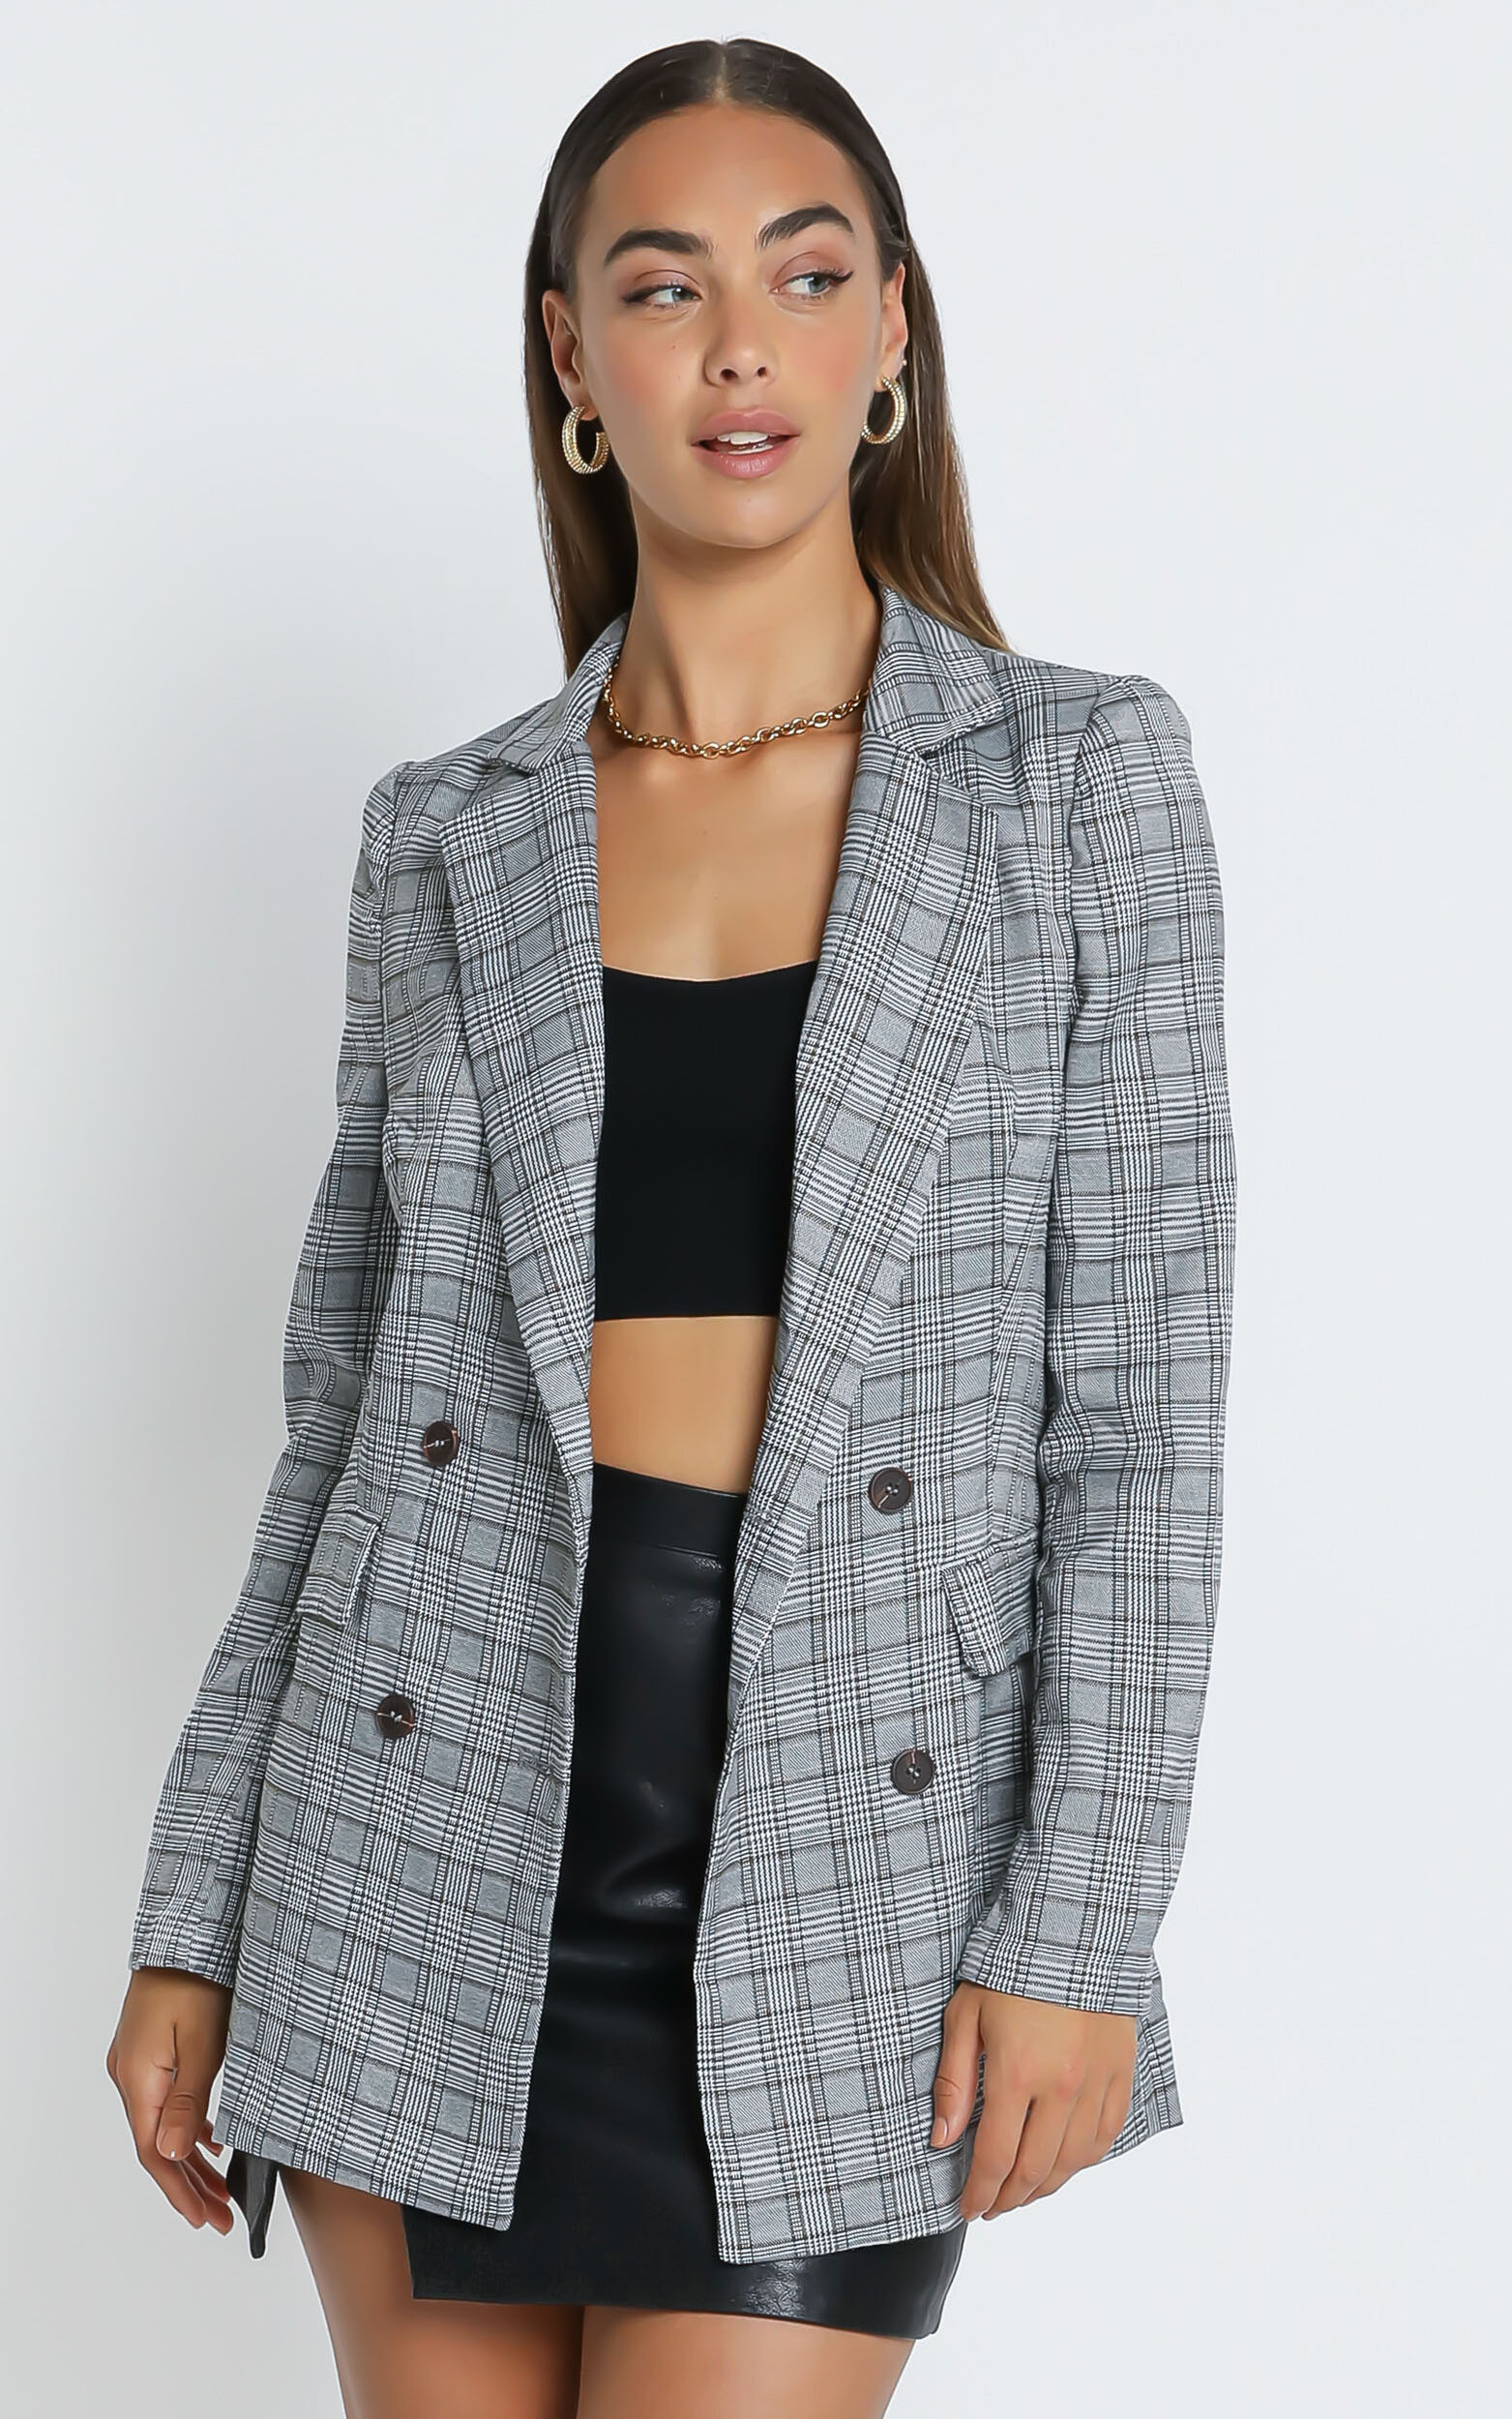 Sort It Out Blazer - Double Breasted Blazer in Grey Check - 04, GRY1